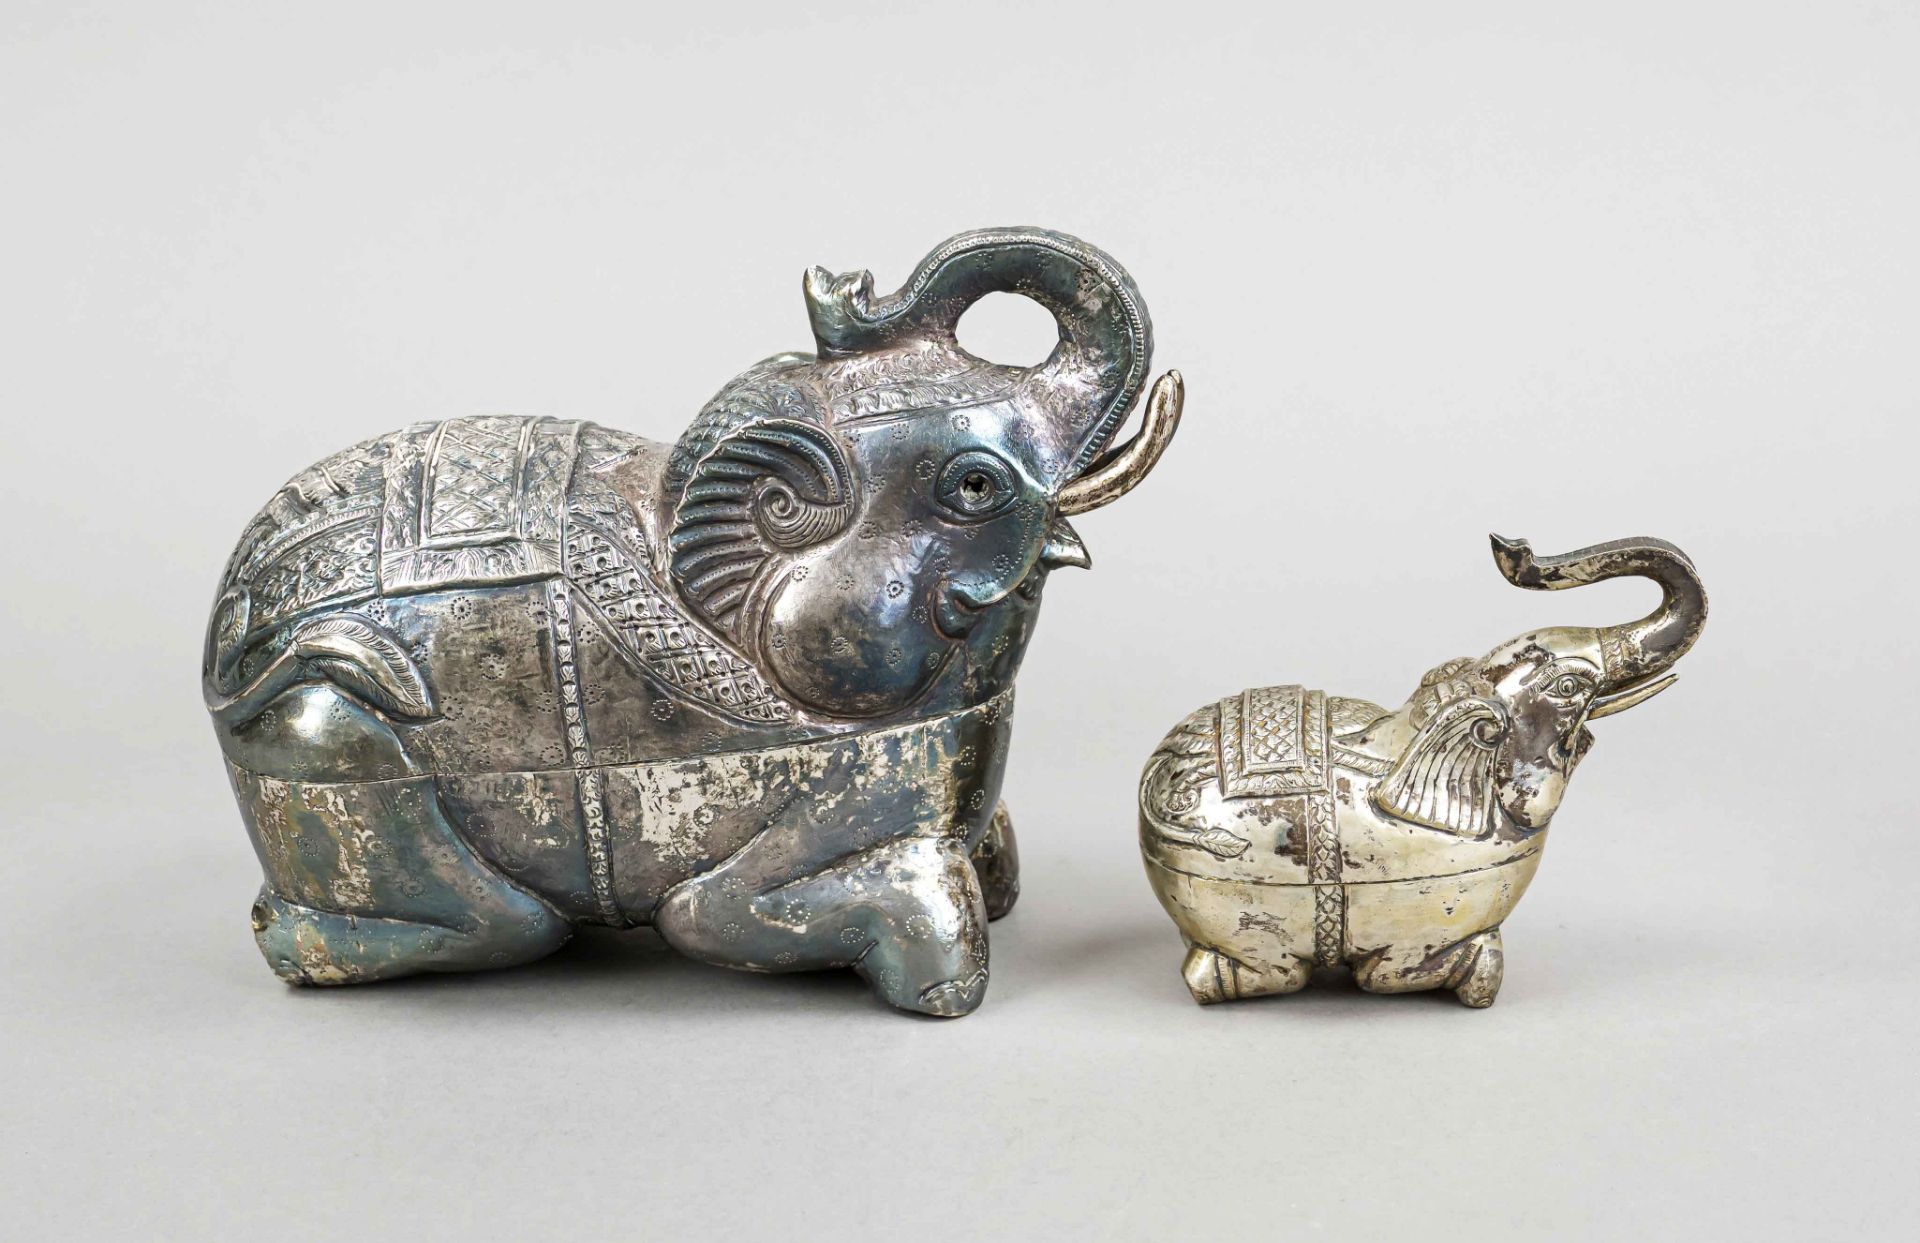 Two figural lidded boxes, 20th century, silver 900/000 and tested, in the shape of reclining